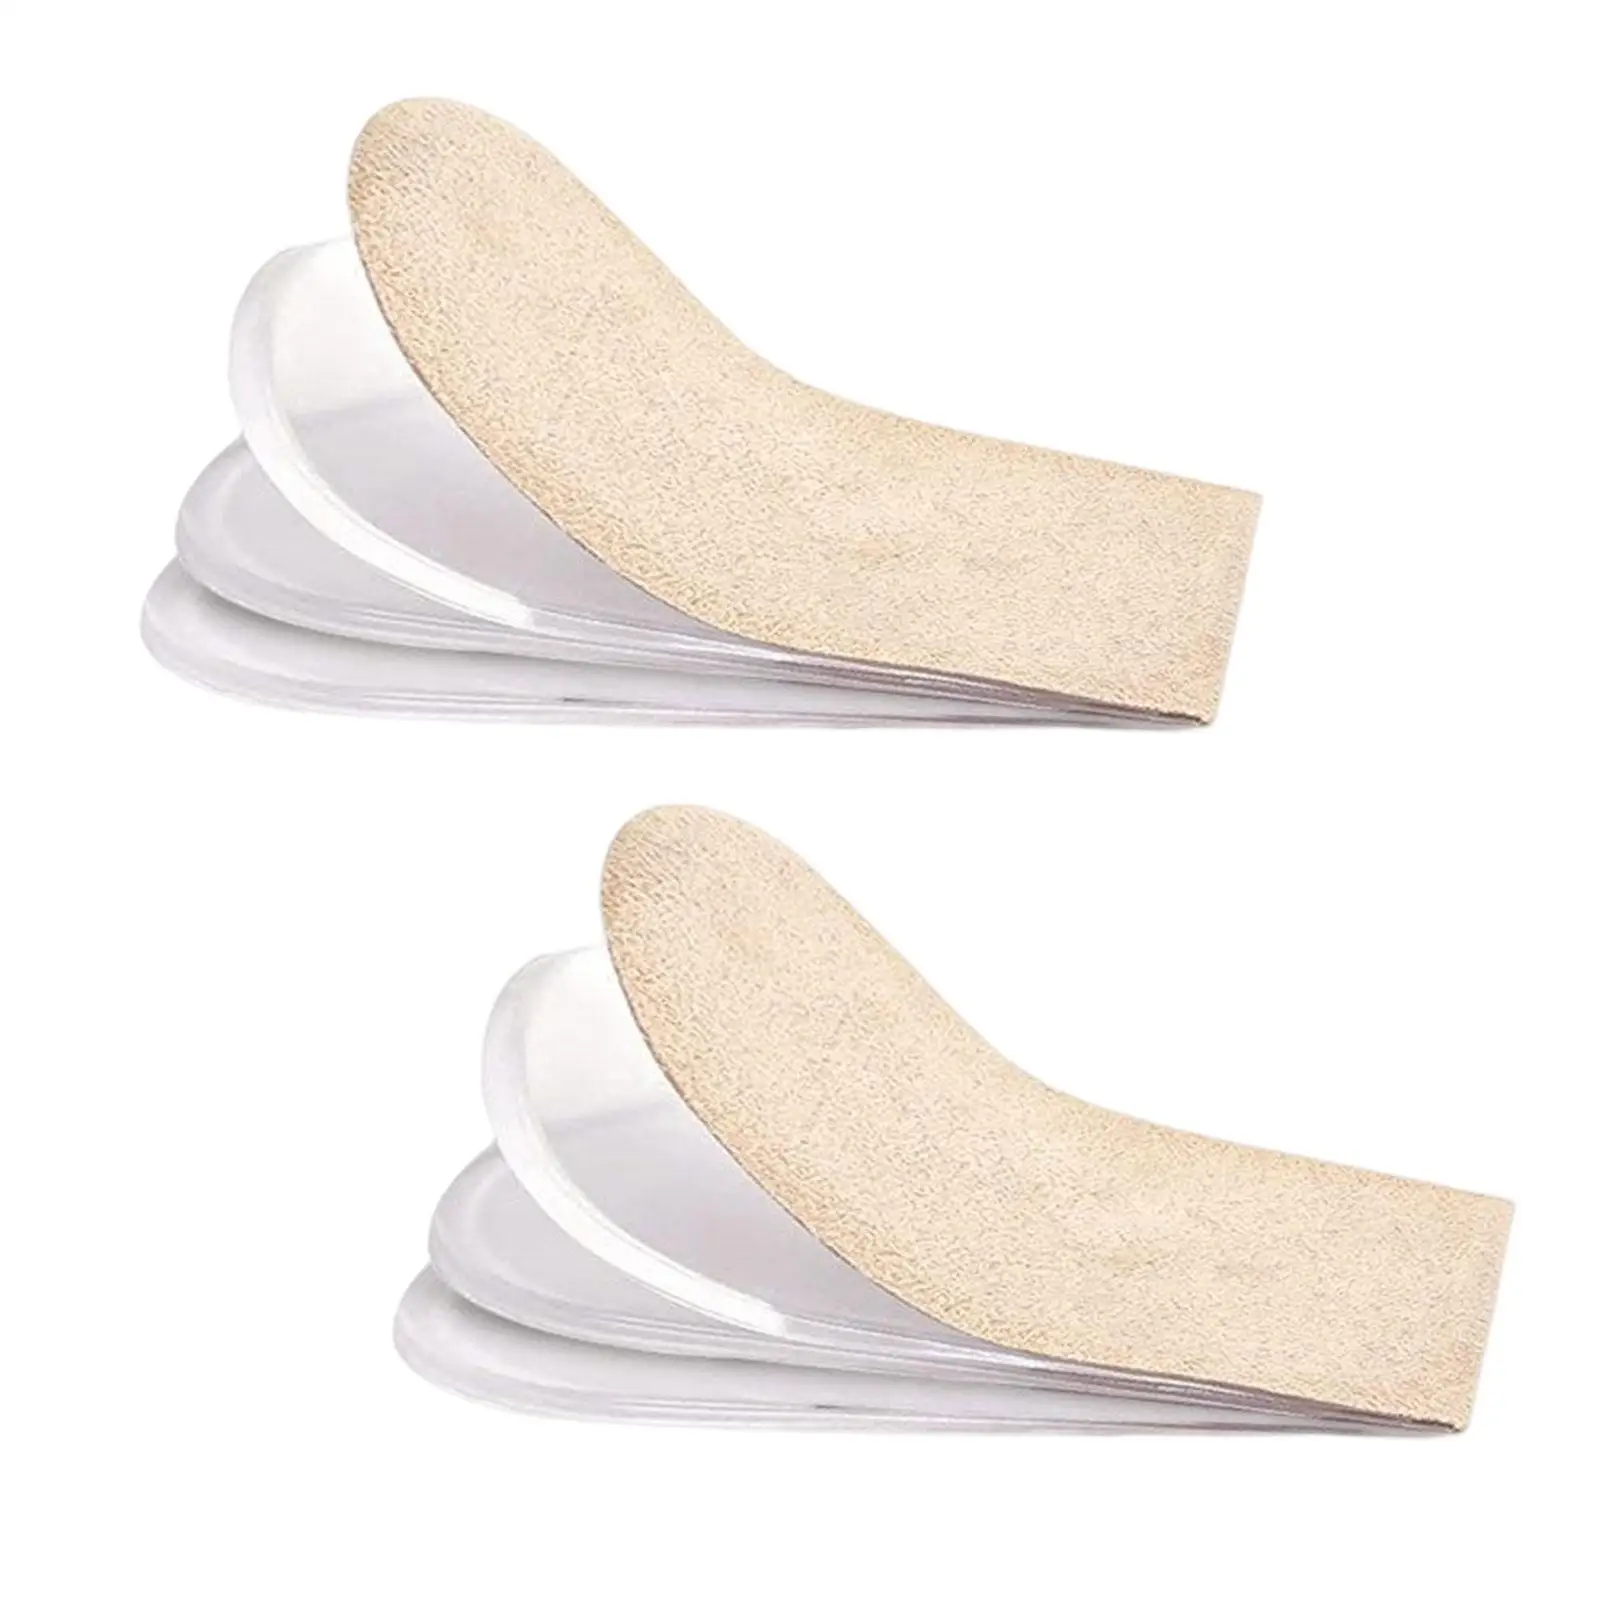 1 Pair Heel Lift Inserts Shoe Heel Pads Shock Absorption for Boots Sandals